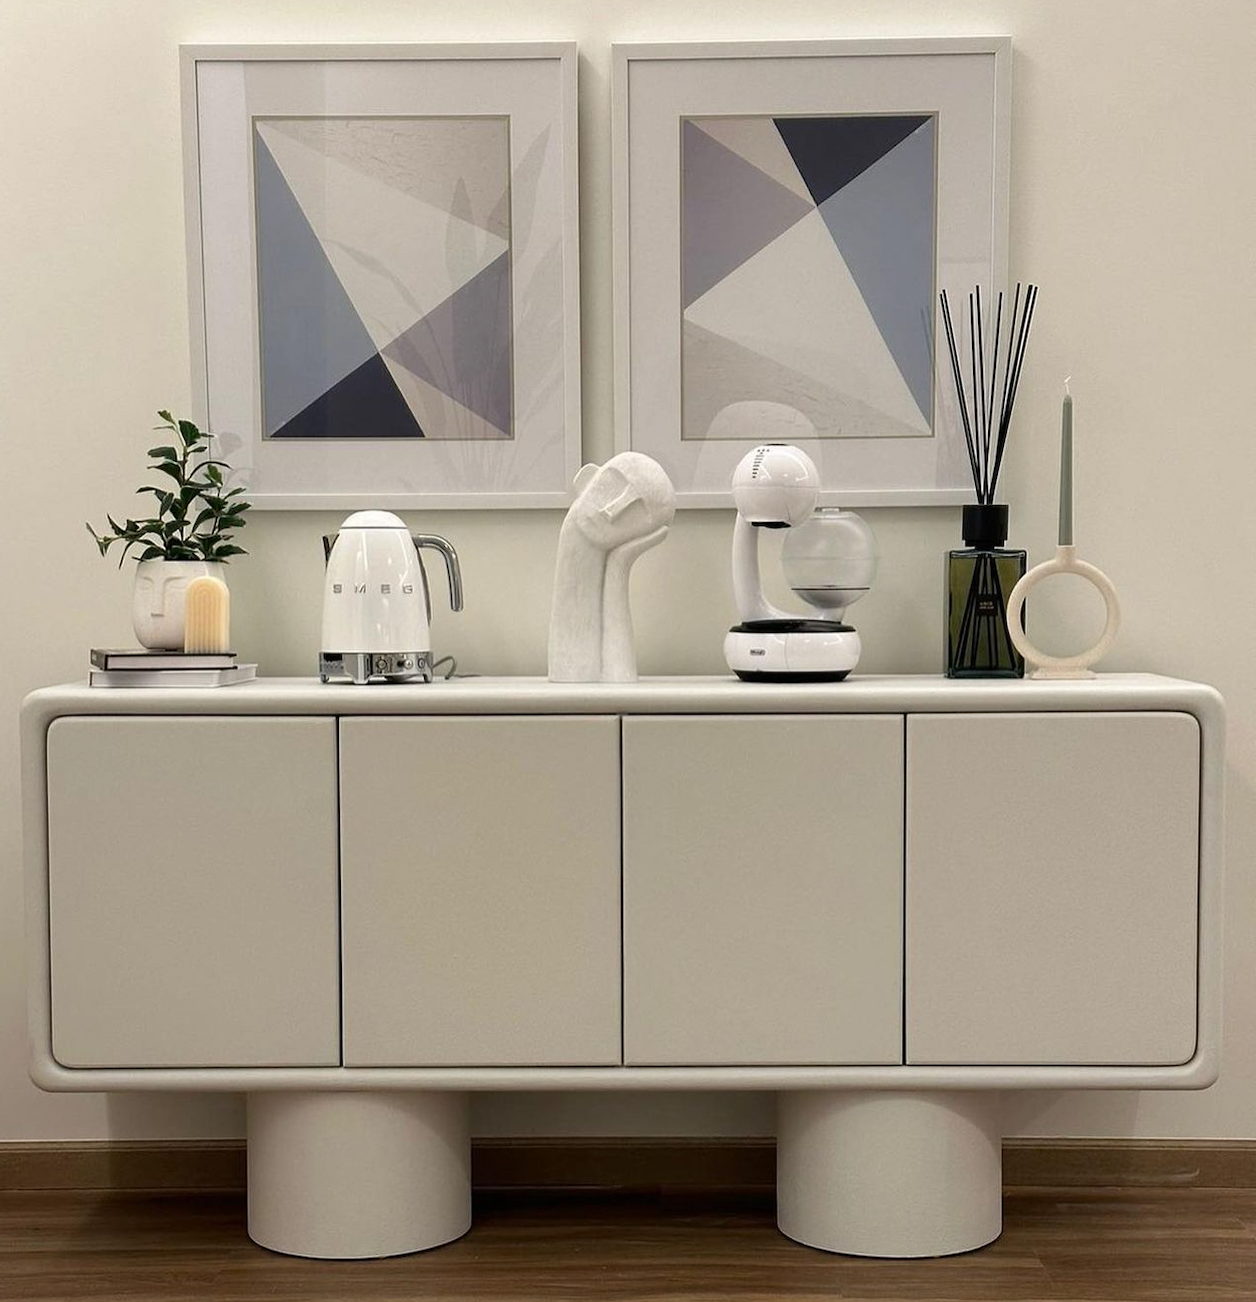 The Barb Sideboard in Microplaster